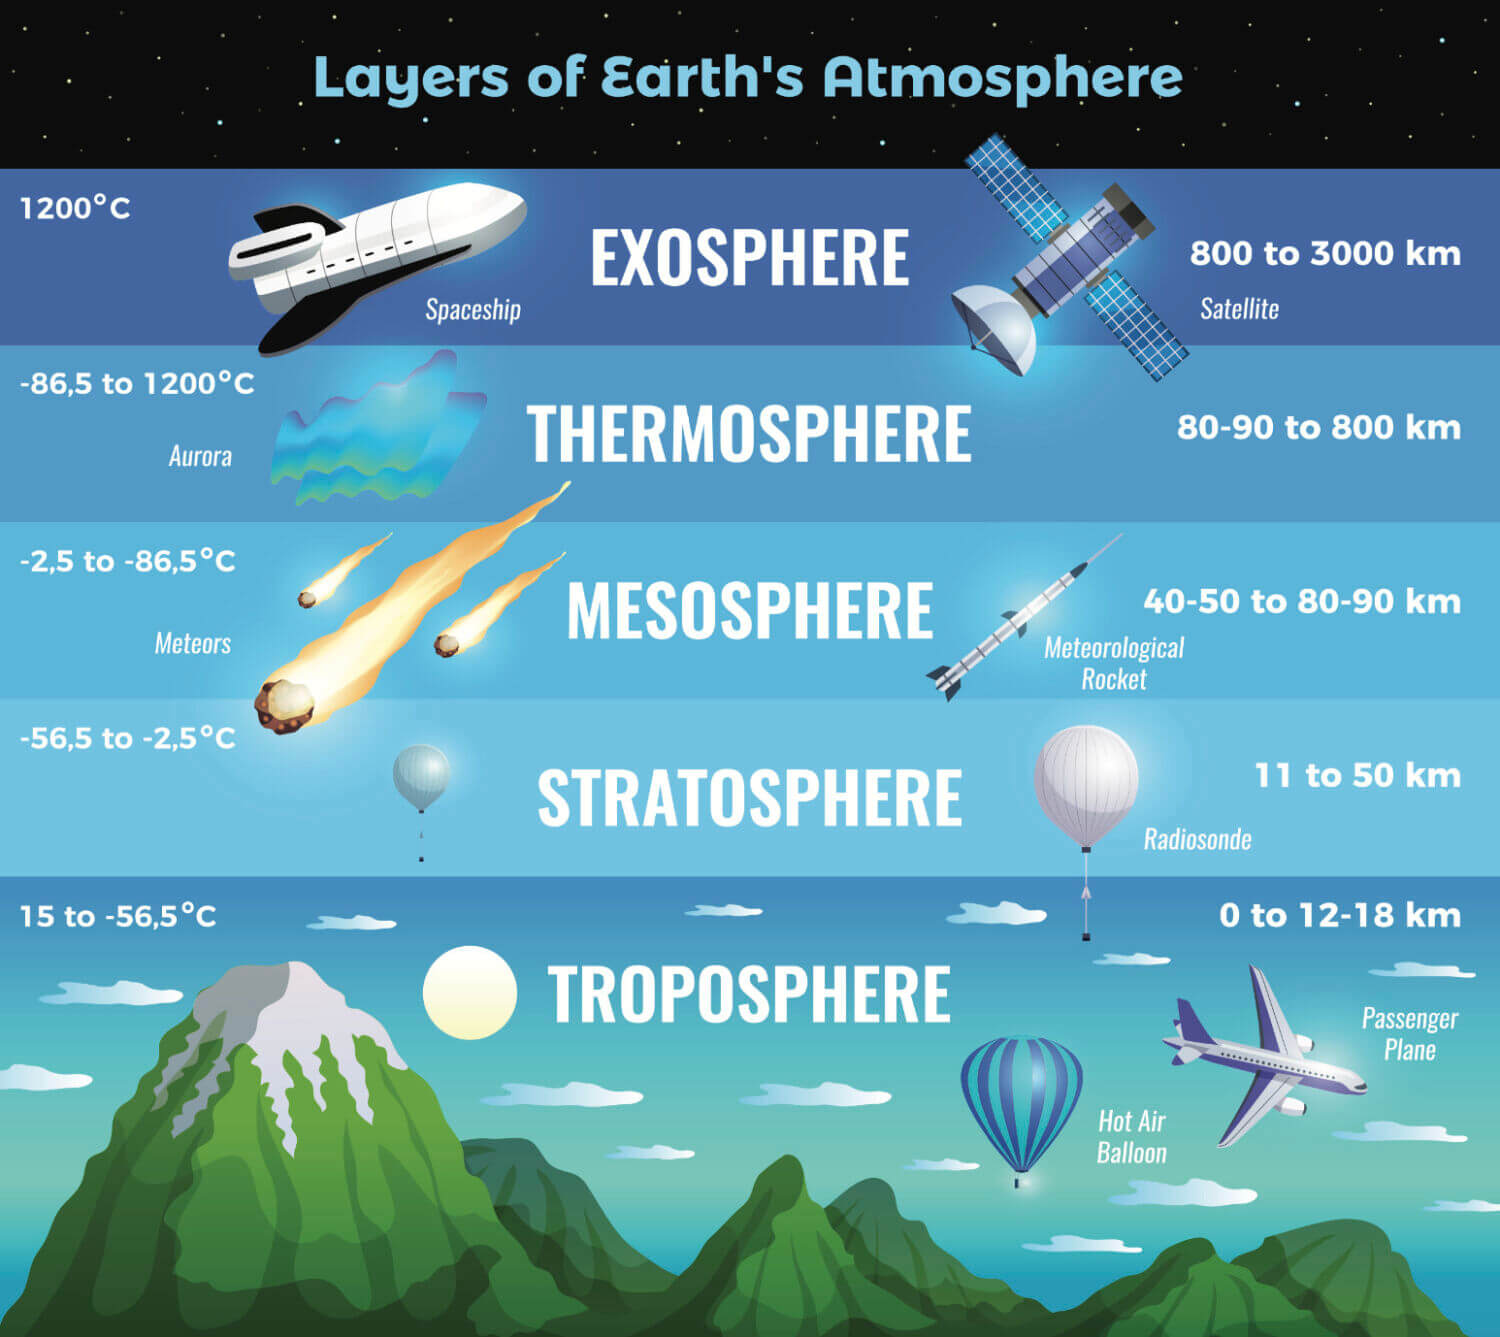 A look at the different layers of the Earth's atmosphere